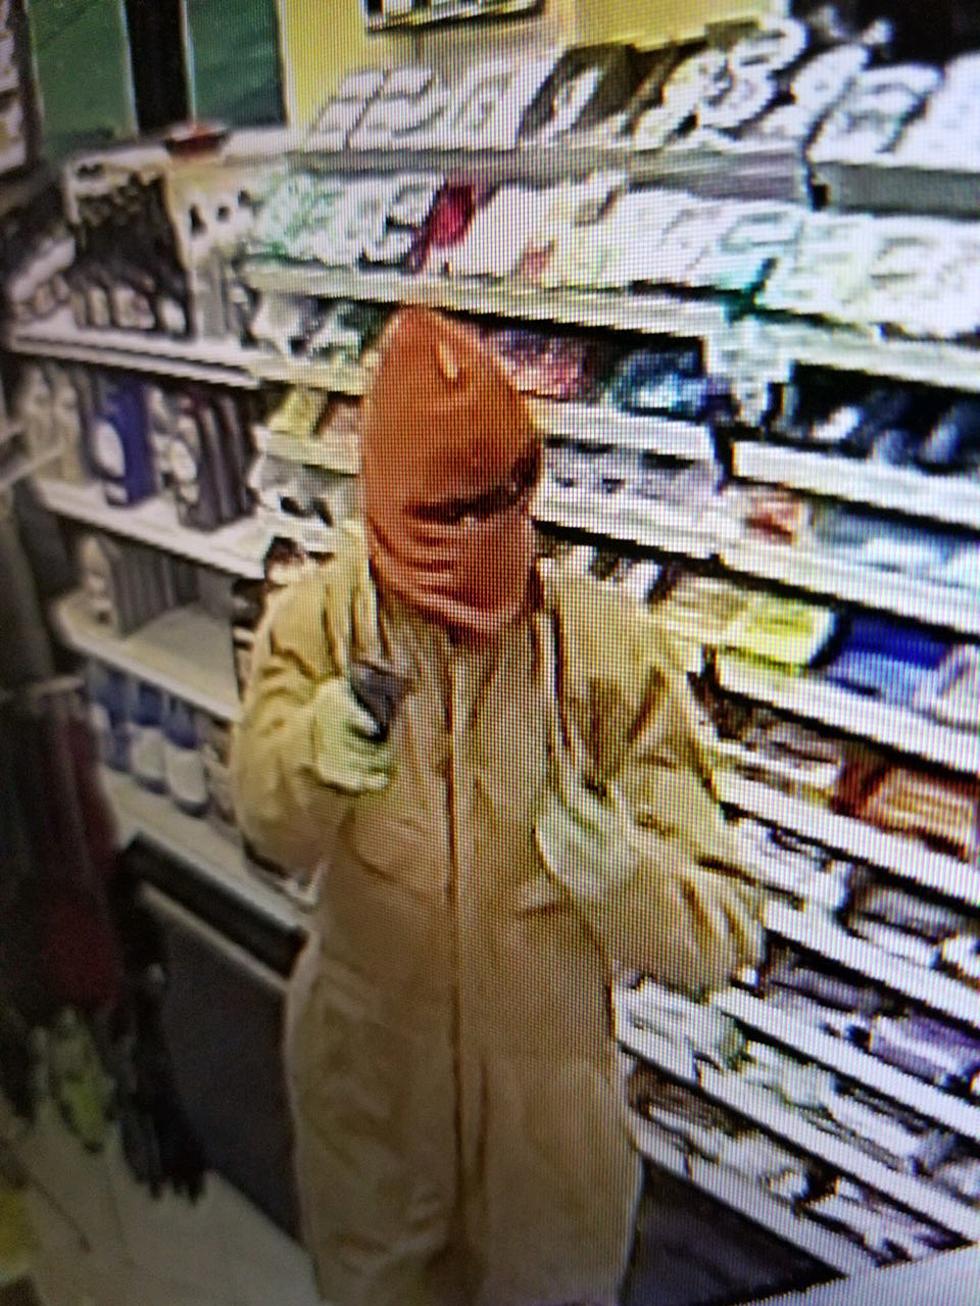 Can You Identify This Robbery Suspect?